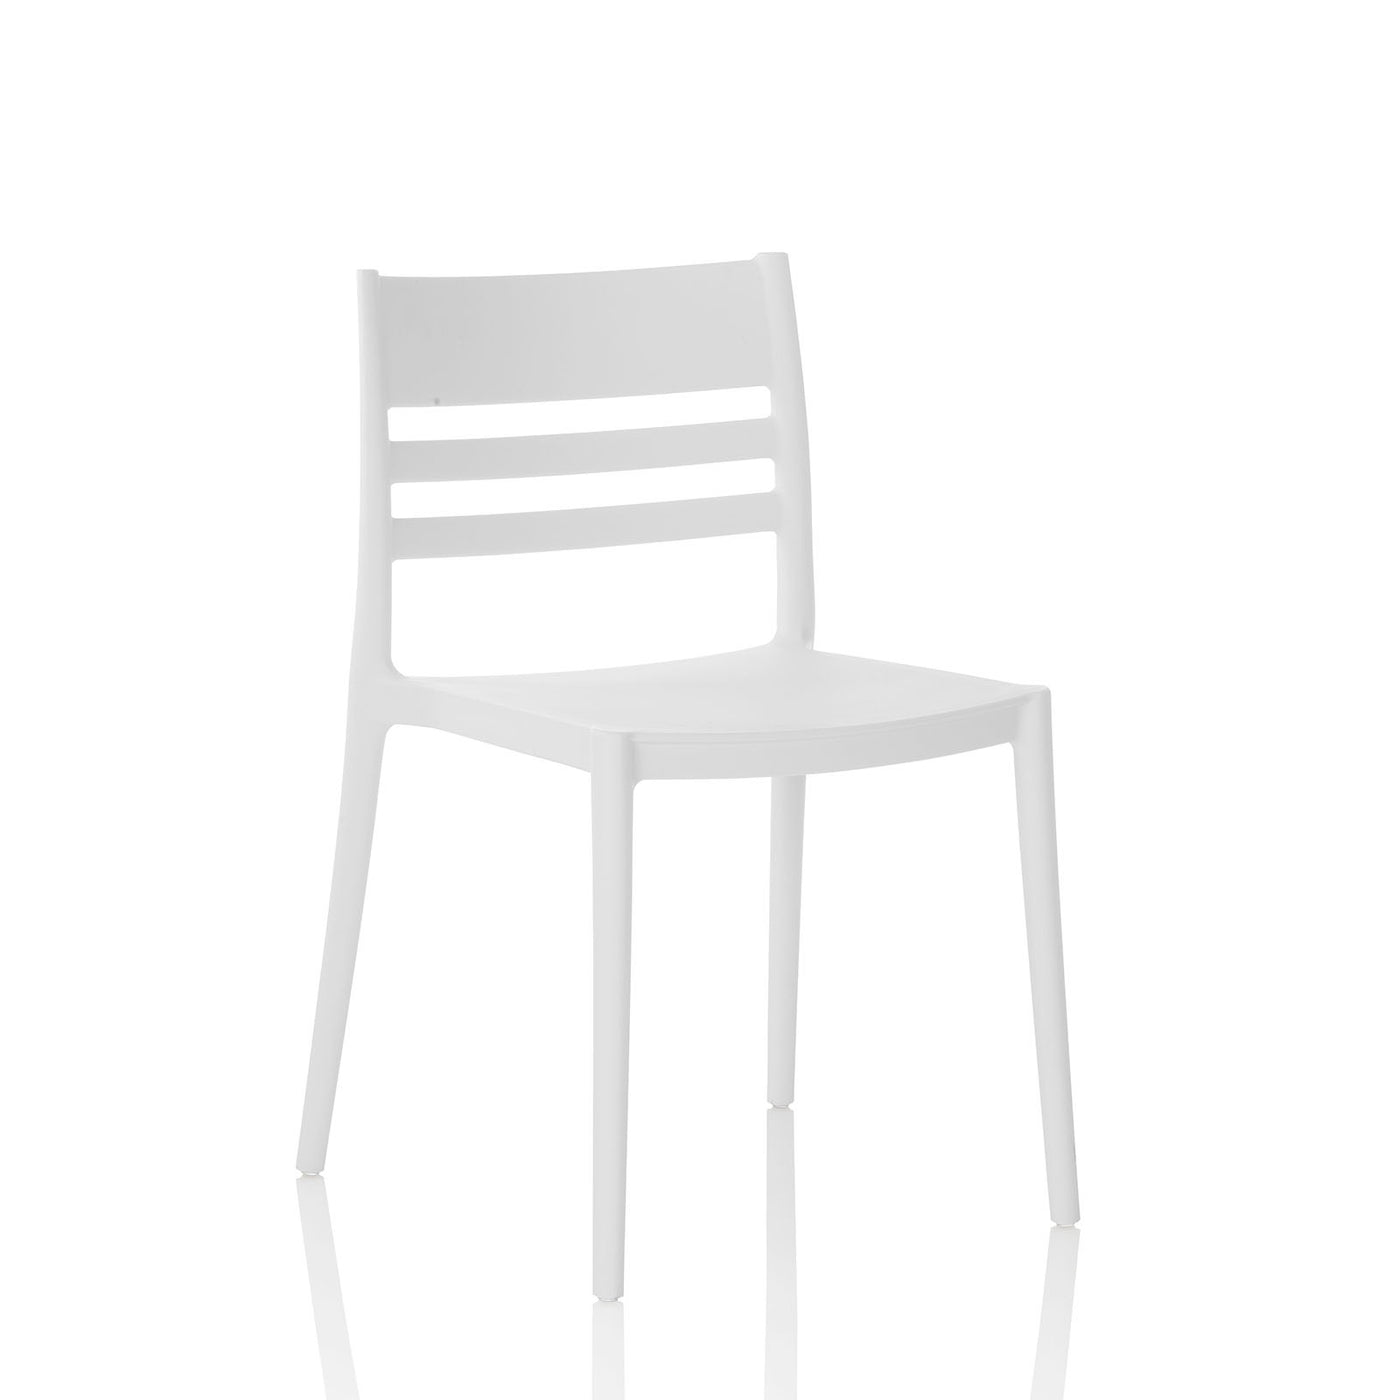 Set of 4 indoor/outdoor chairs CLYDE white